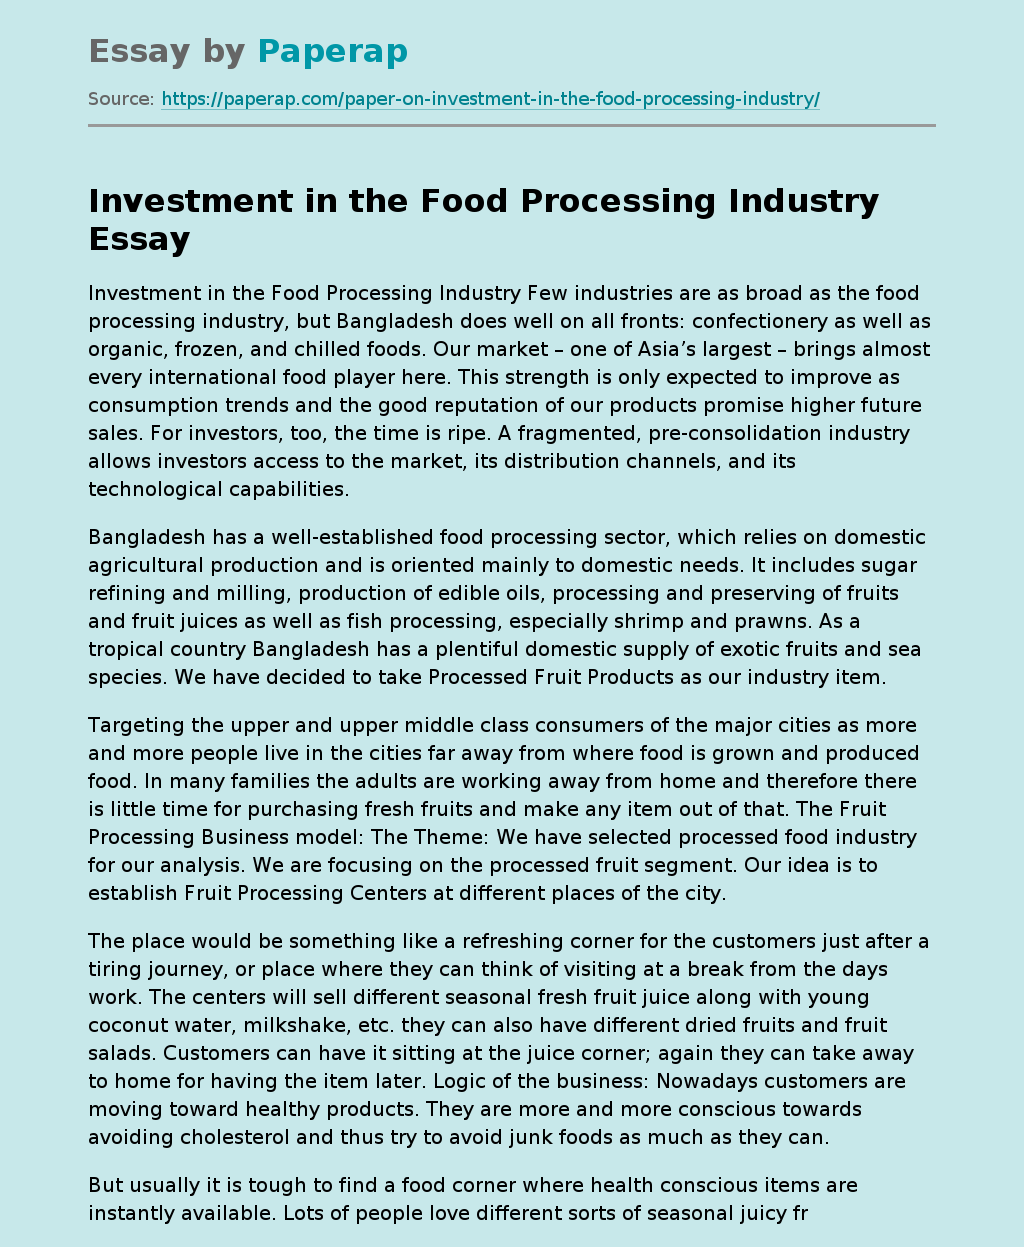 Investment in the Food Processing Industry